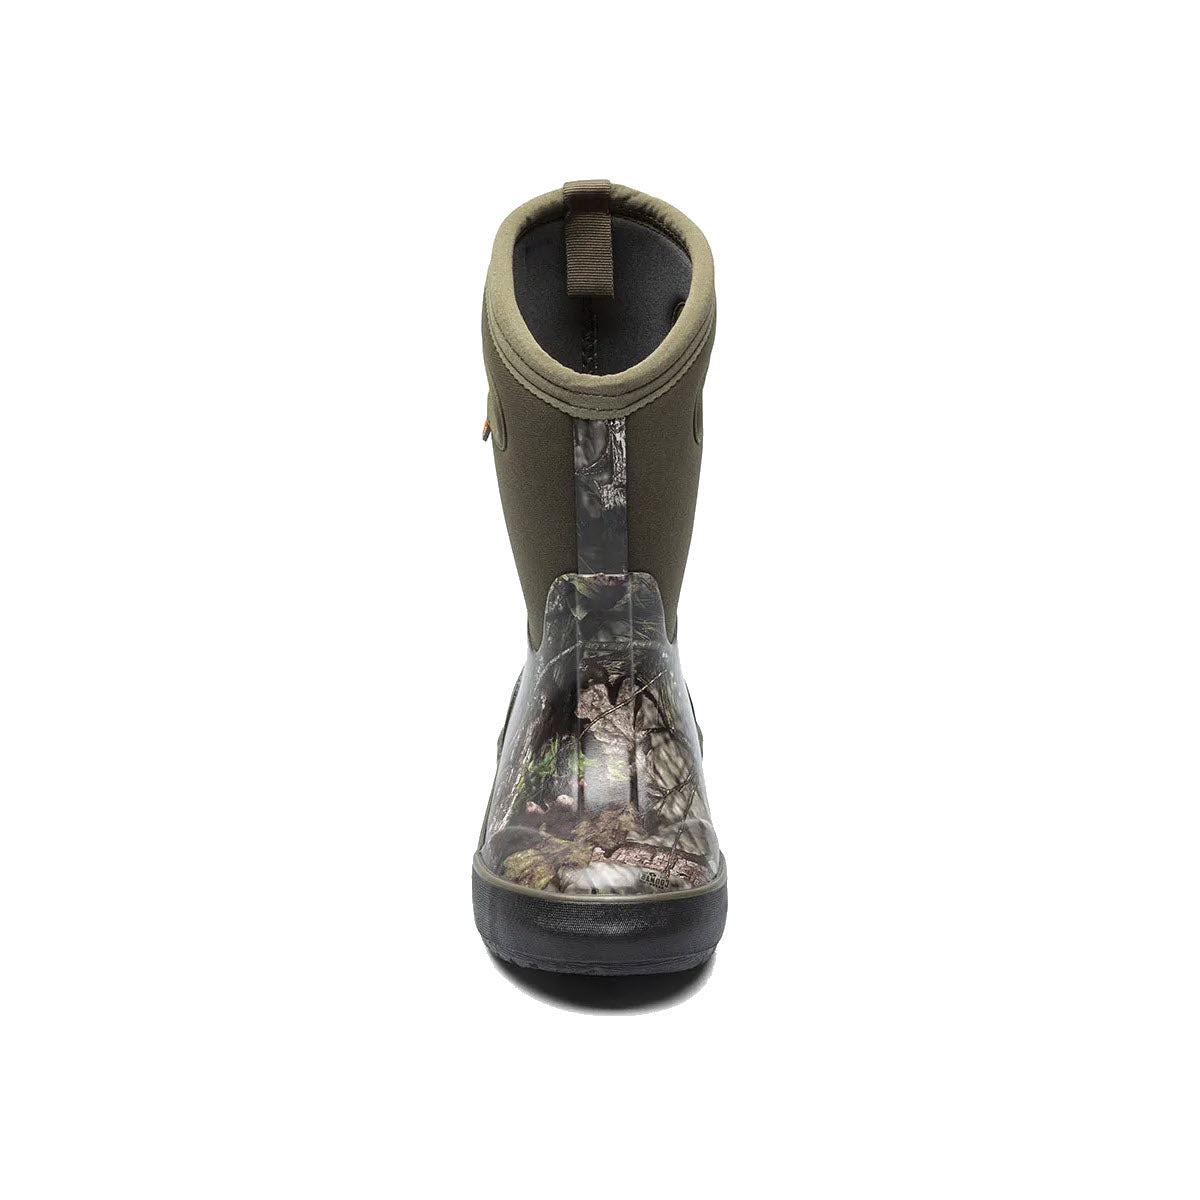 A single Bogs Classic II Mossy Oak kids&#39; boot with a zipper, viewed from the front, isolated on a white background.